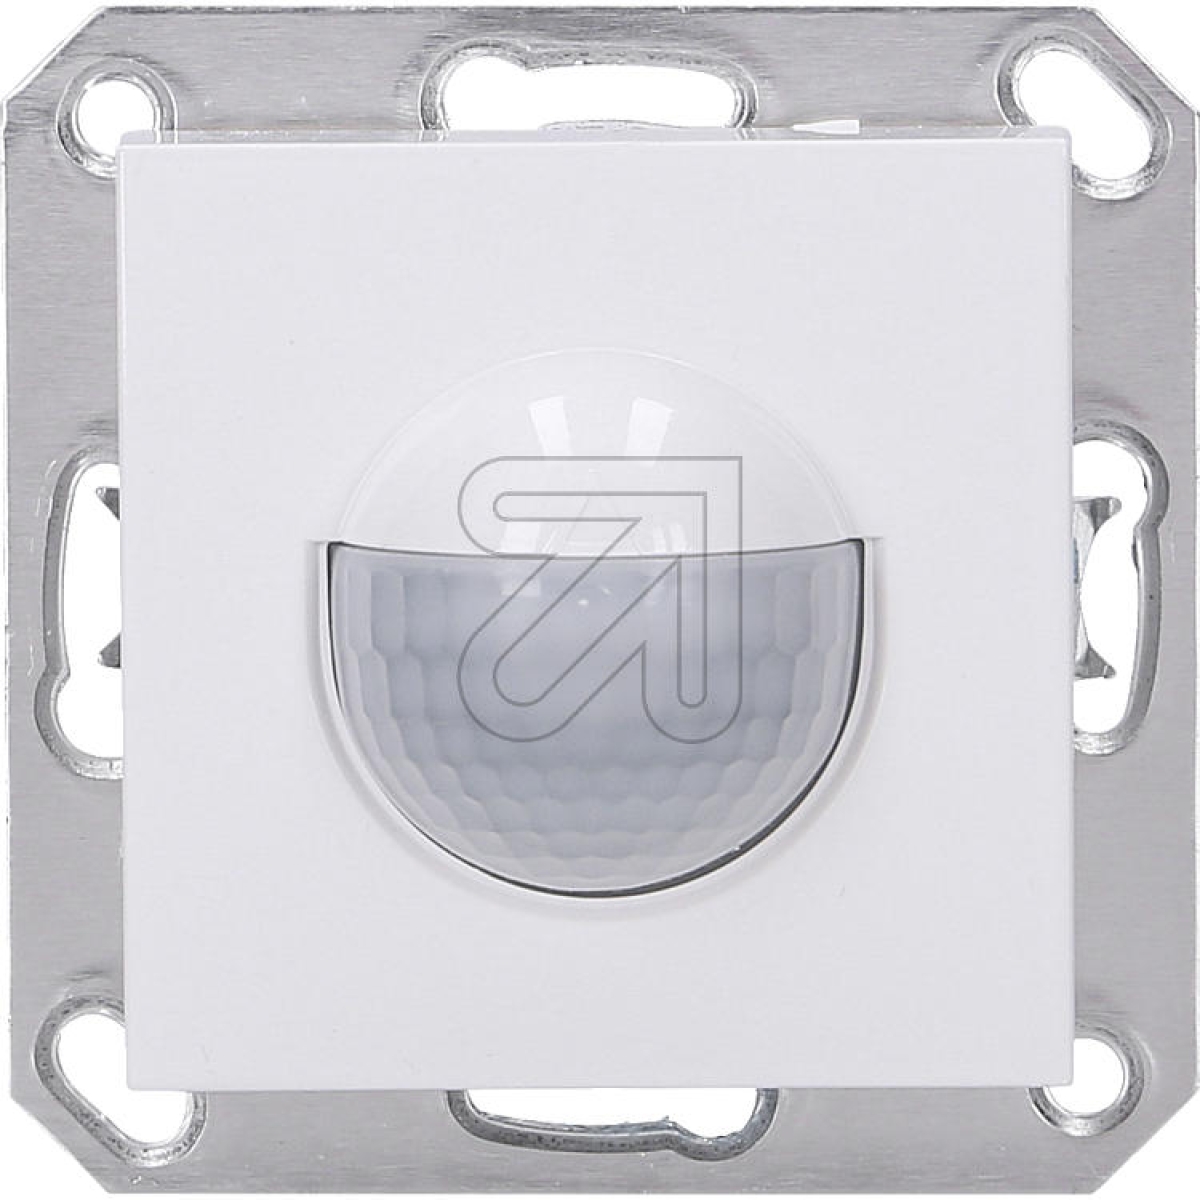 KleinUP motion detector artkisweiß K55BUP185/34Article-No: 090580